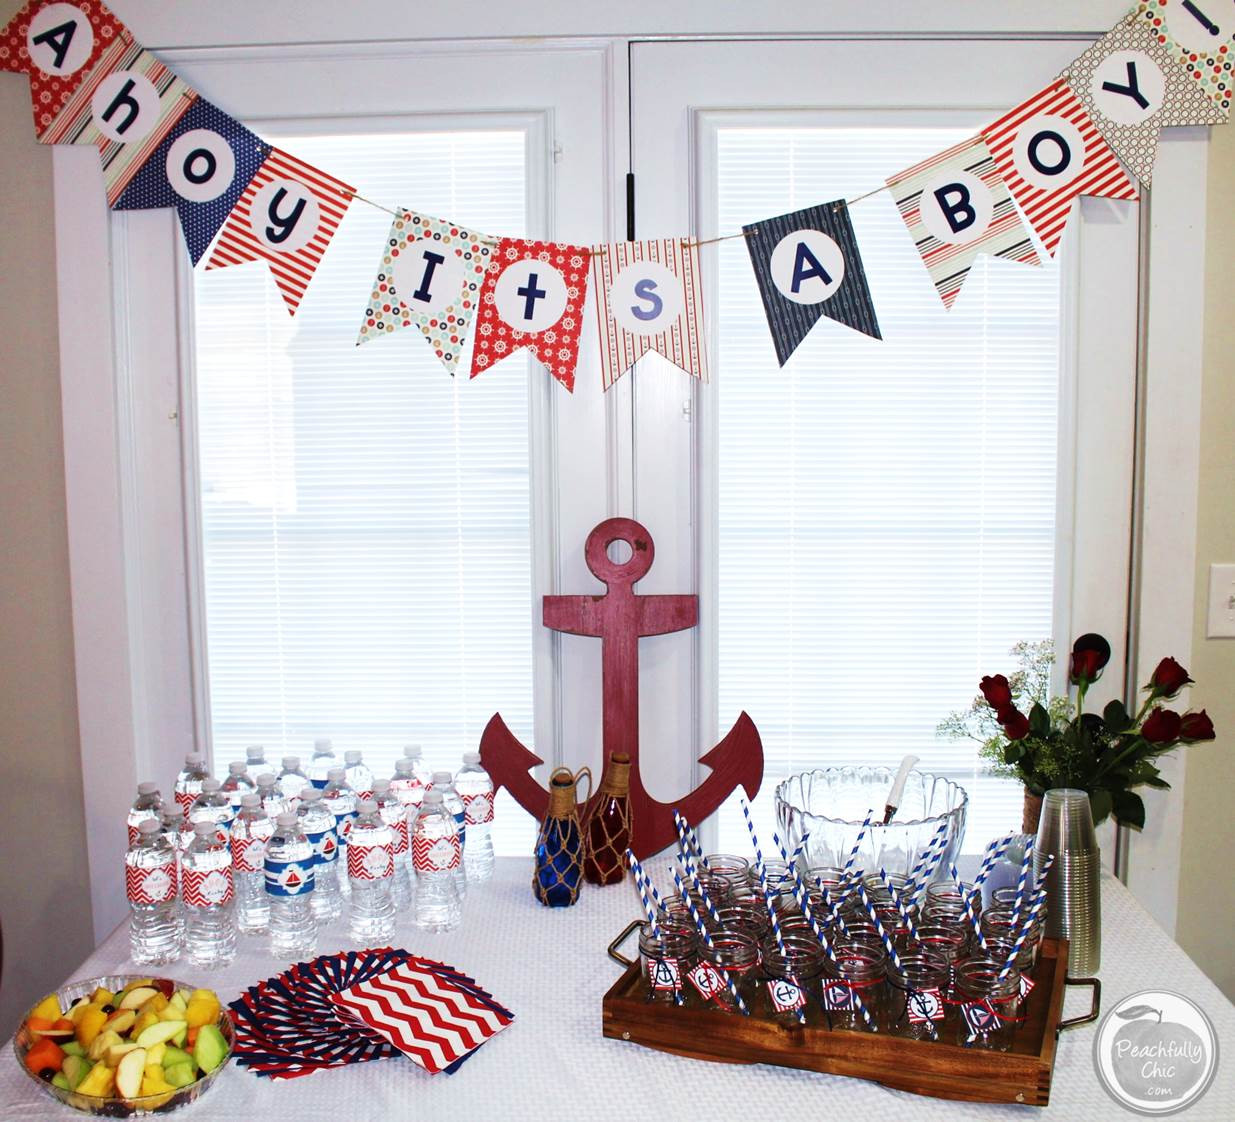 Nautical Baby Boy Decor
 10 Ideas For A Nautical Themed Baby Shower – Ramshackle Glam